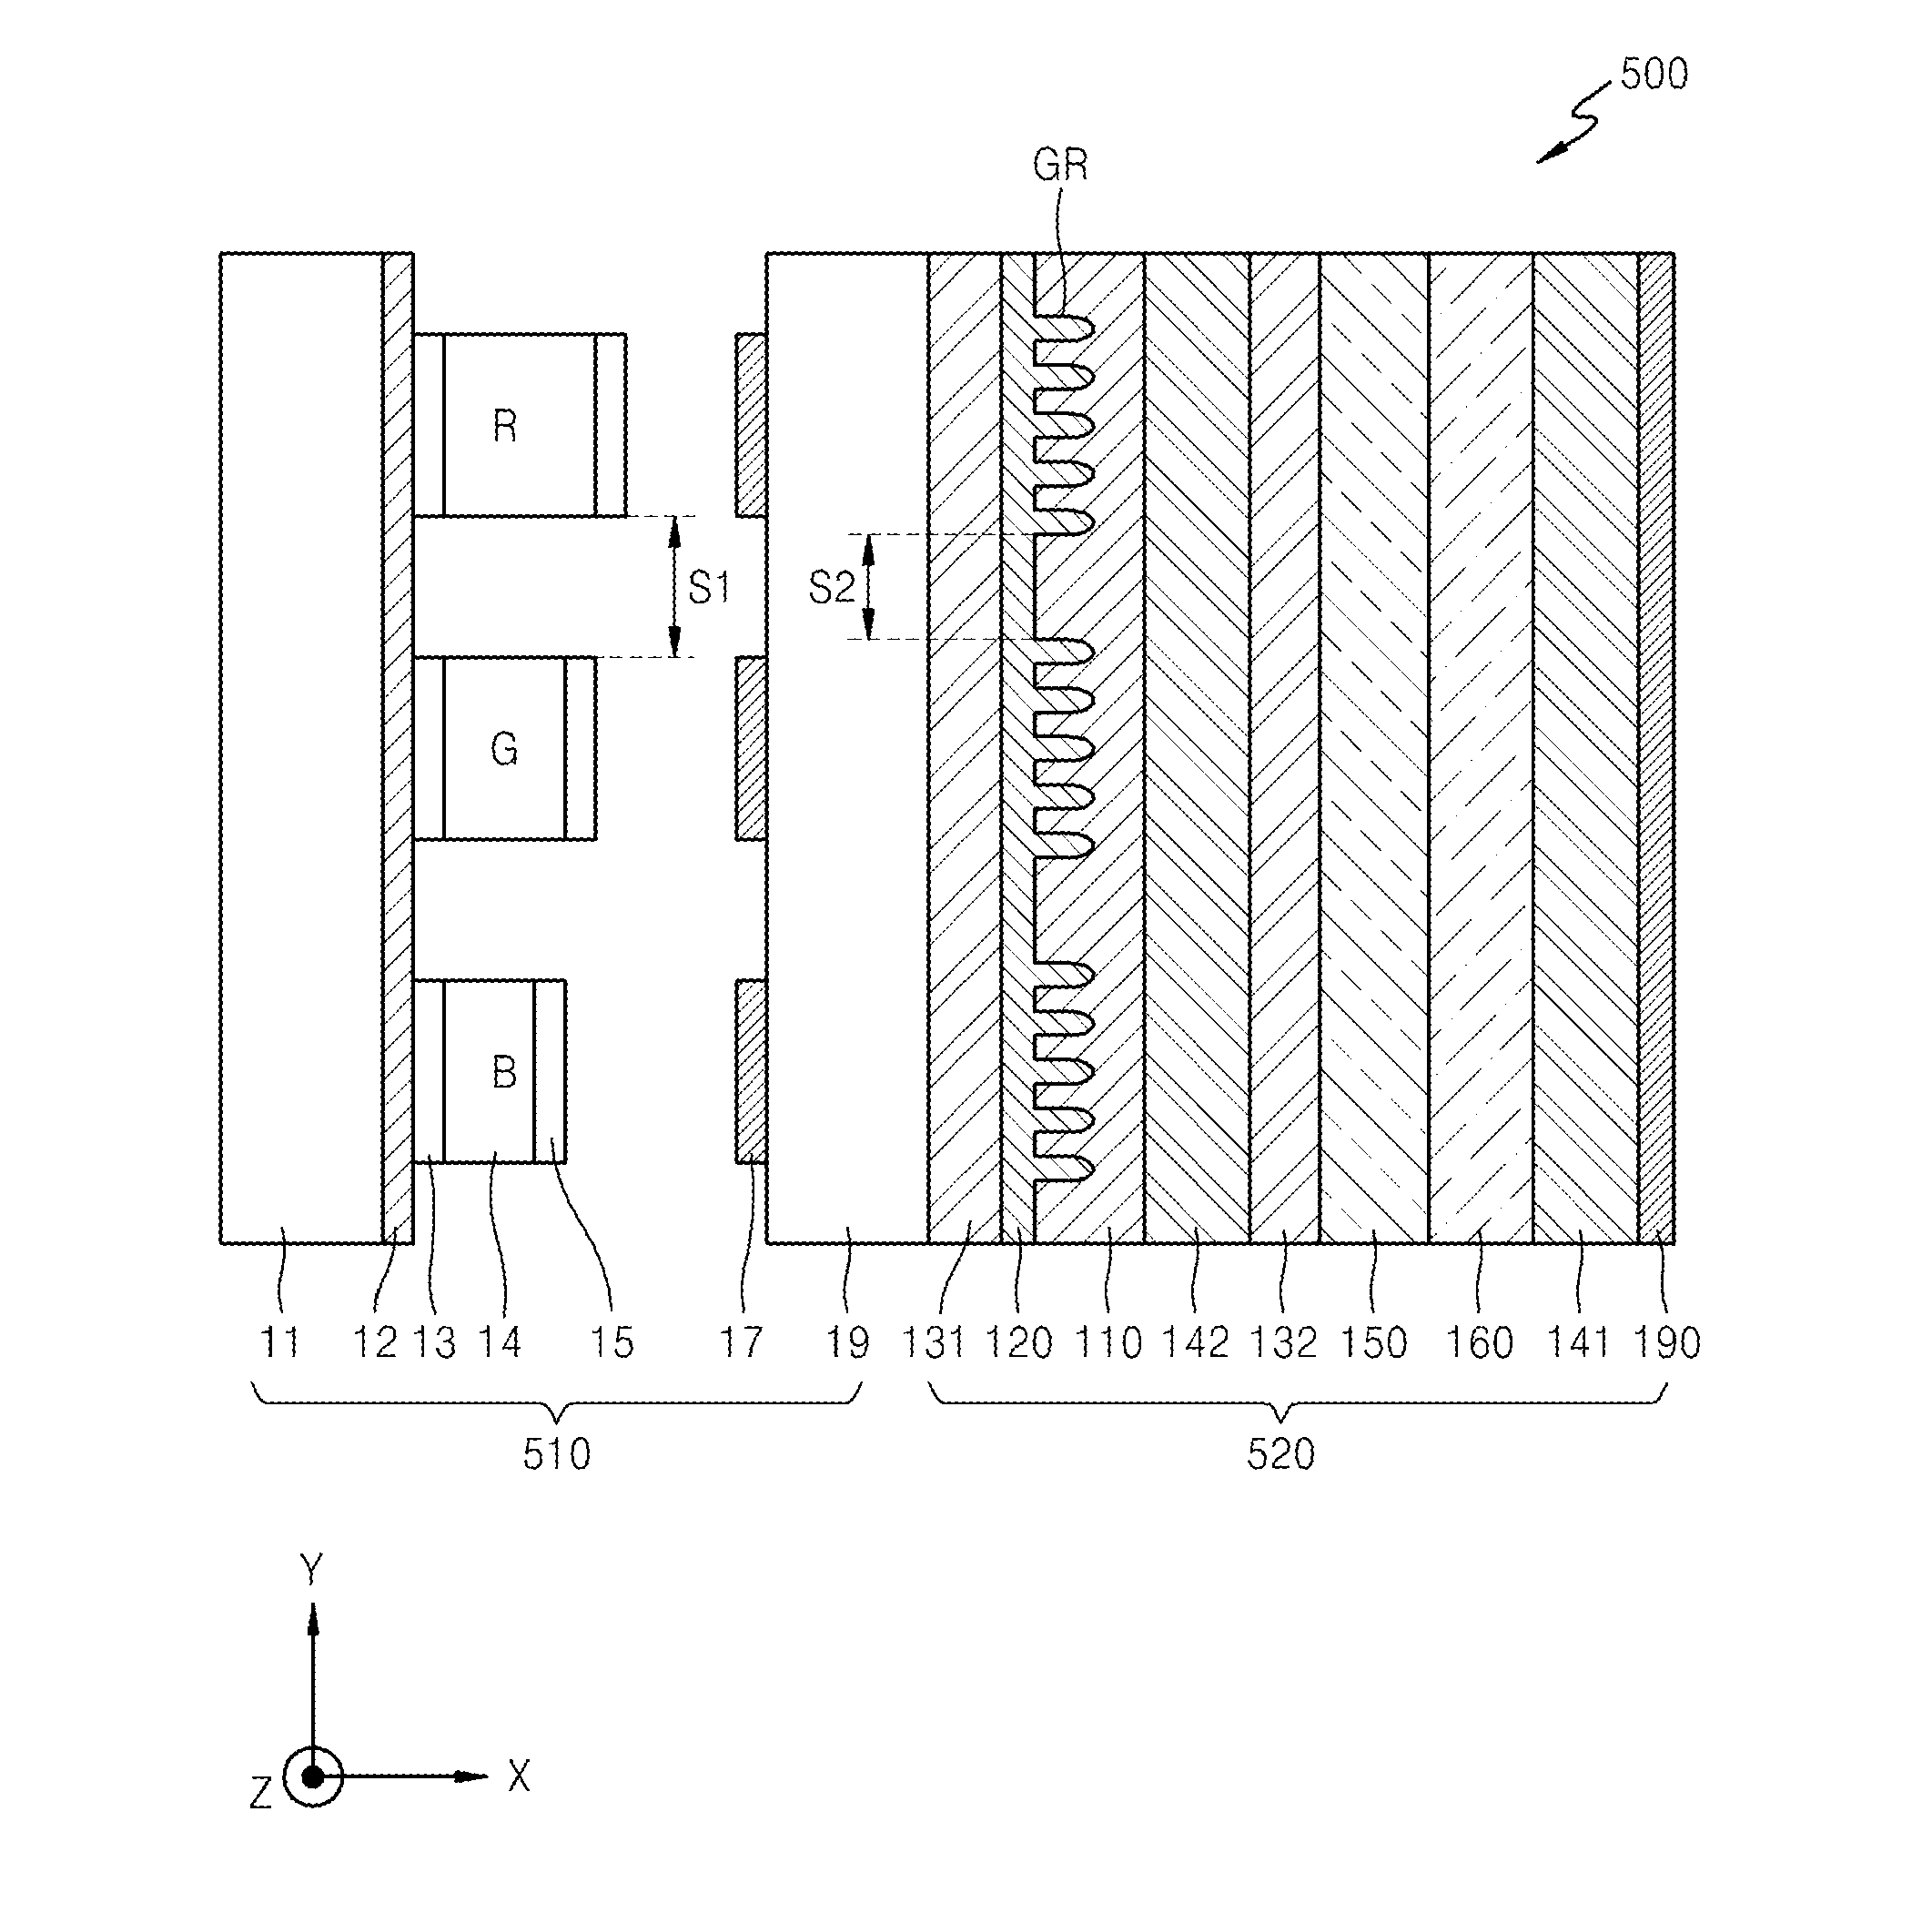 Optical films for reducing color shift and organic light-emitting display devices employing the same